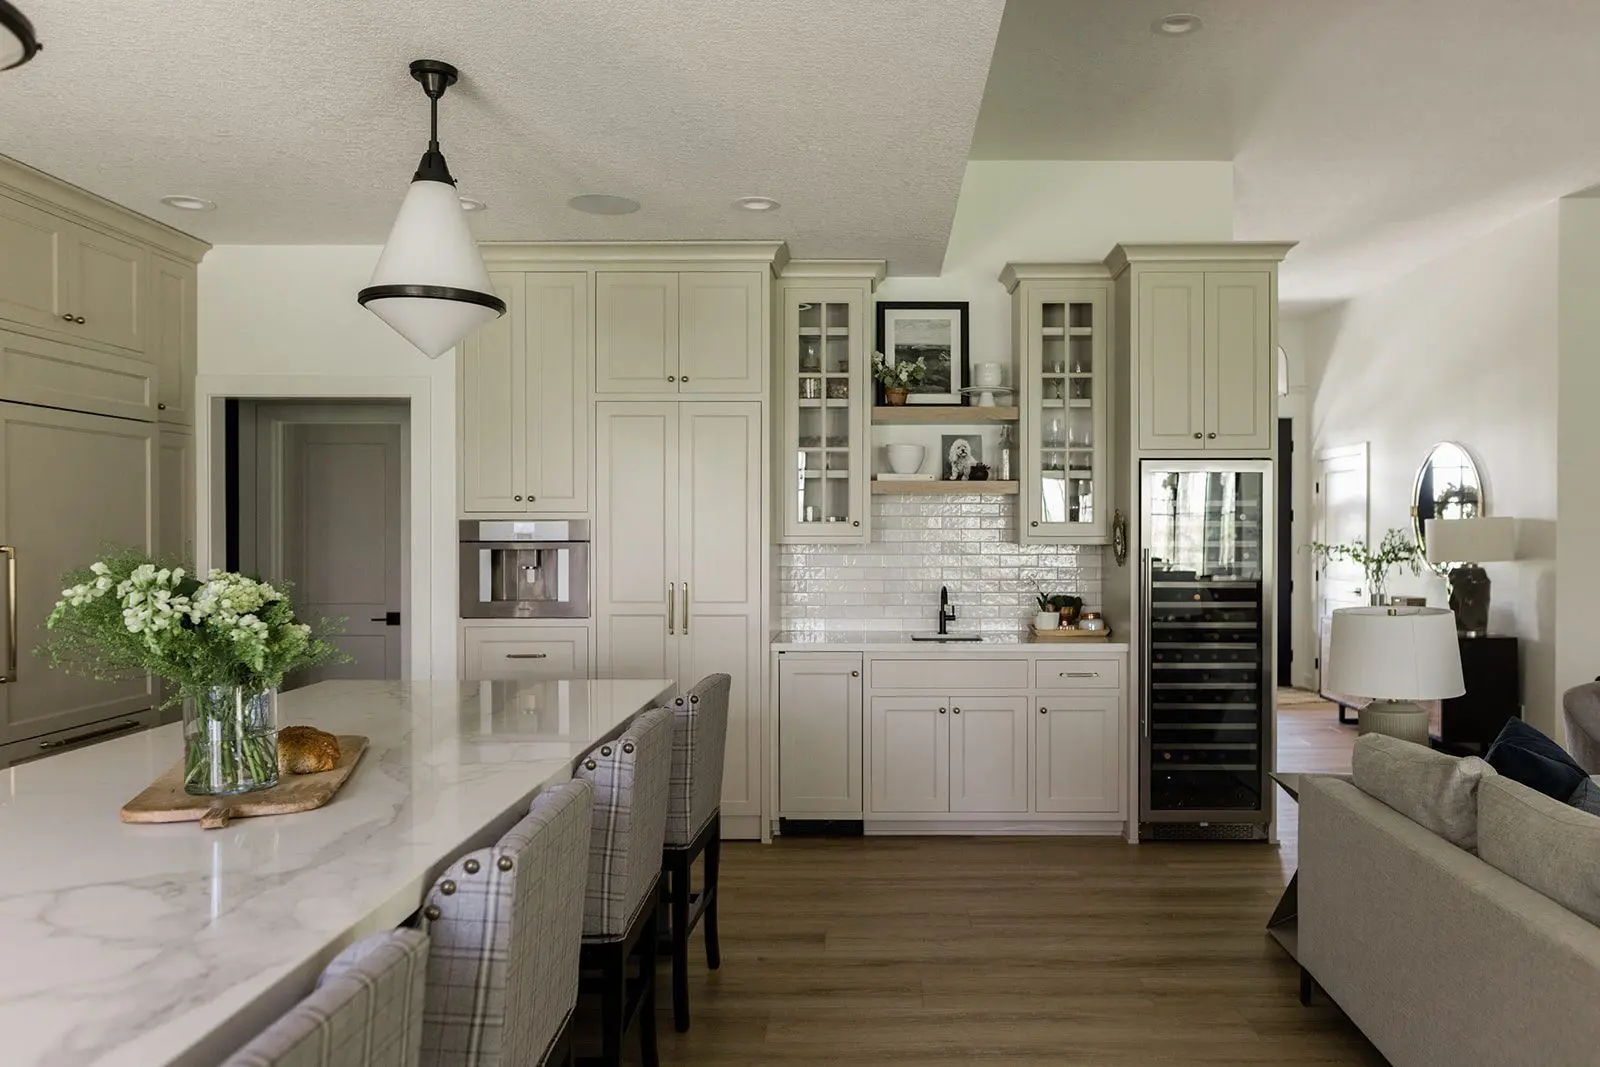 White house remodelling with cabinets and backsplashes